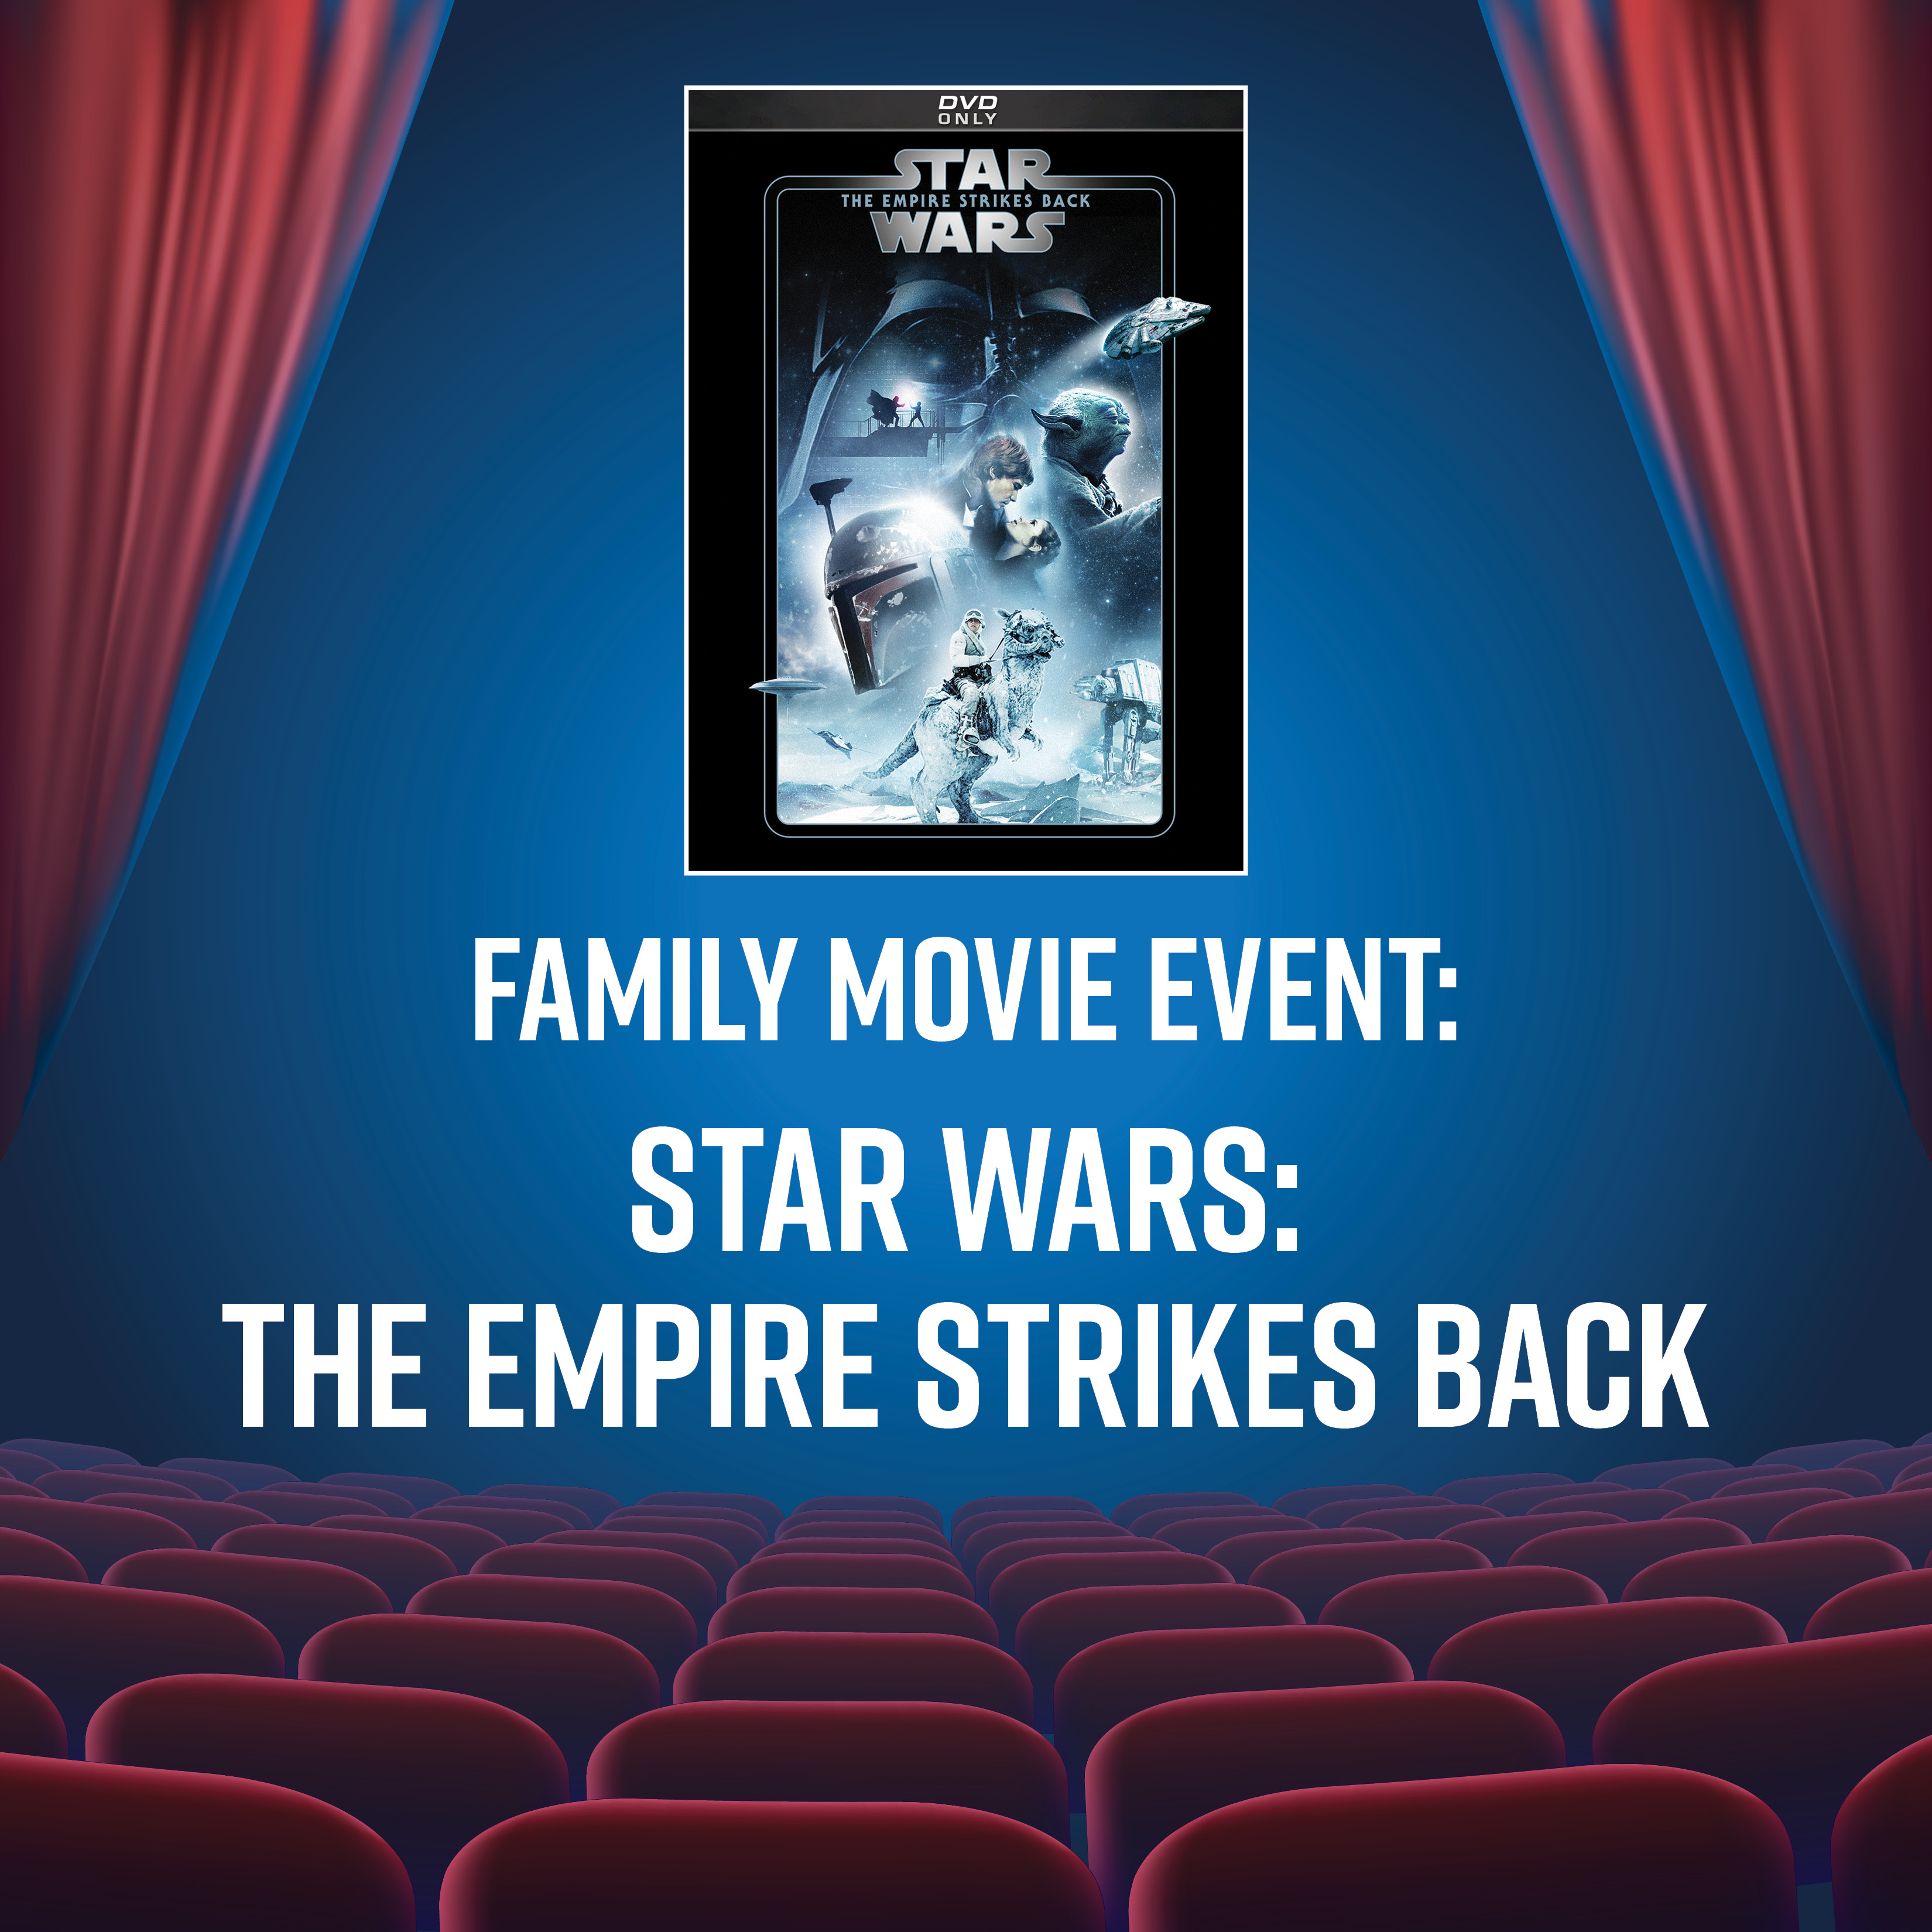 Family Movie Event: Star Wars: The Empire Strikes Back